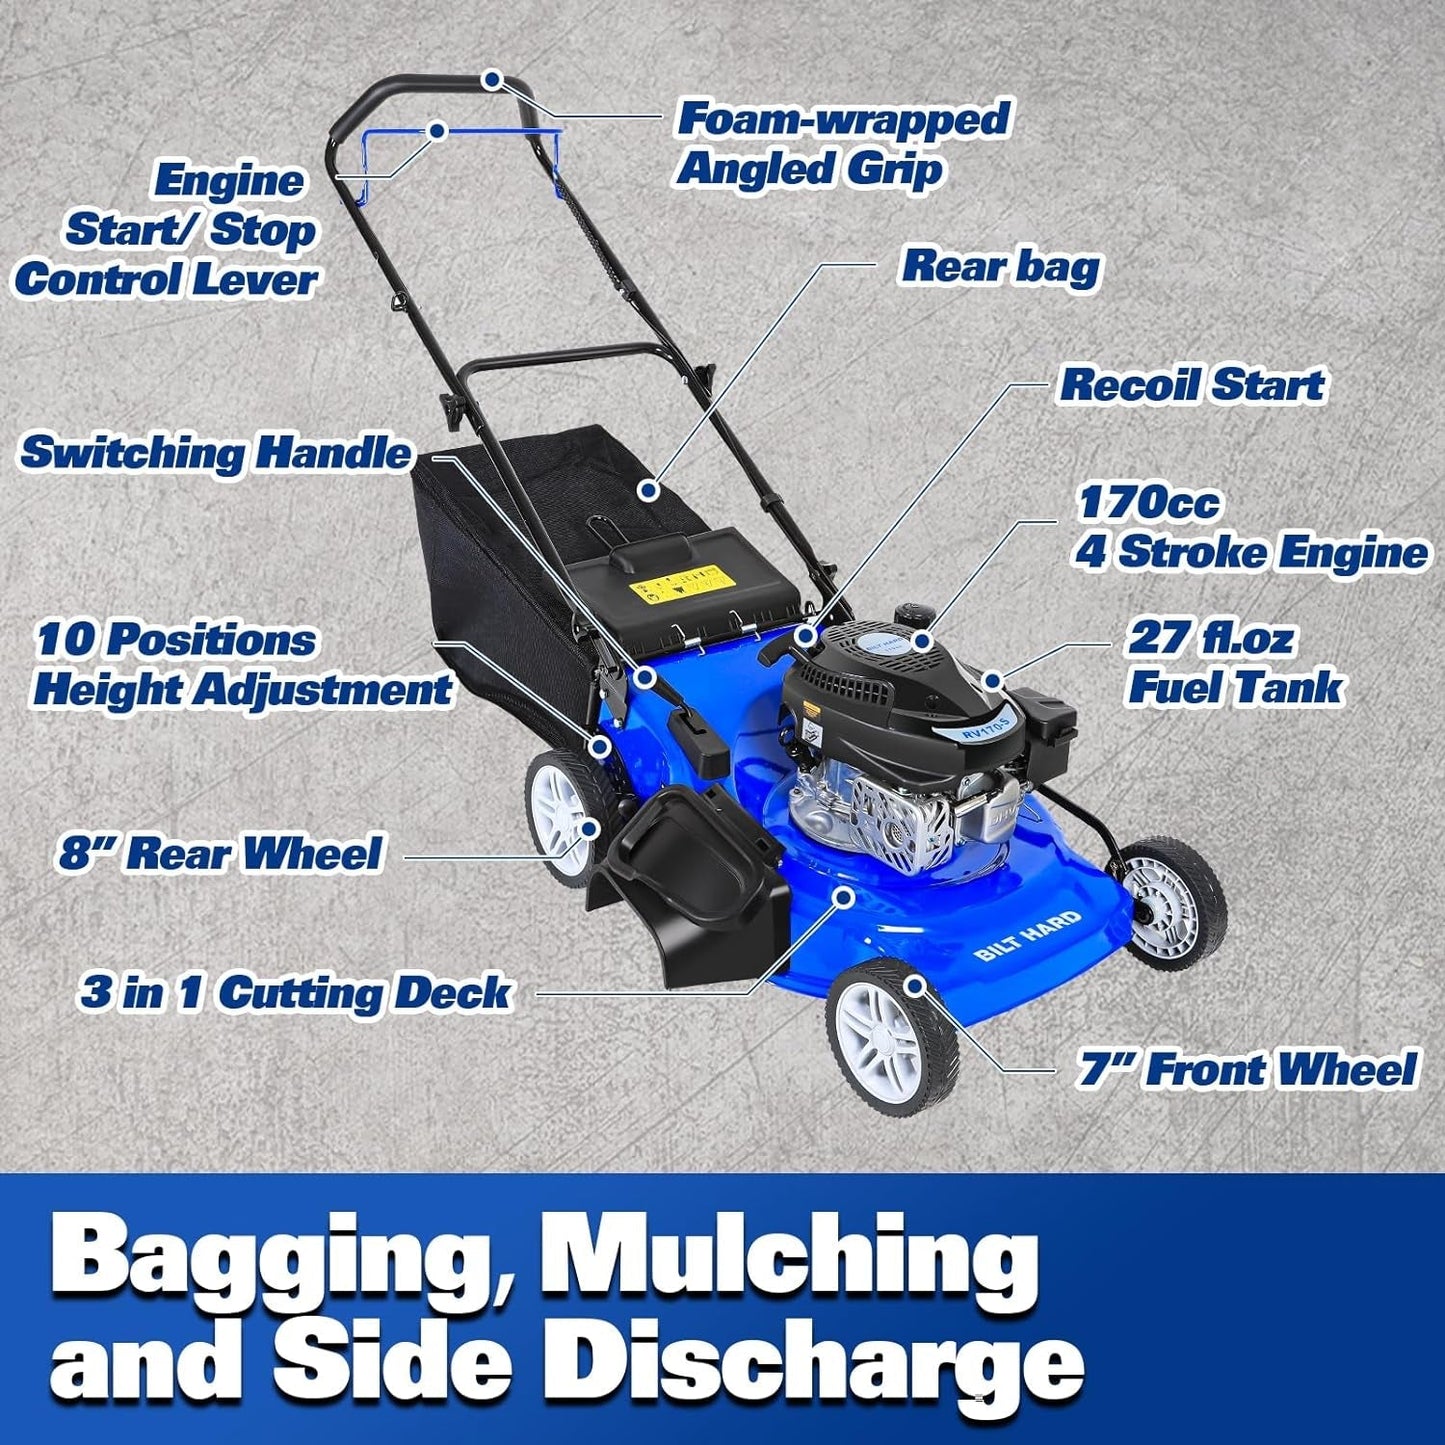 Offer For 21 Inch Lawn Mower Gas Powered, 4-Cycle 170Cc Engine, 3-In-1 Push Lawnmower with Bagging, Mulching & Side Discharge, Adjustable 10-Positions Cutting Height MowerShop